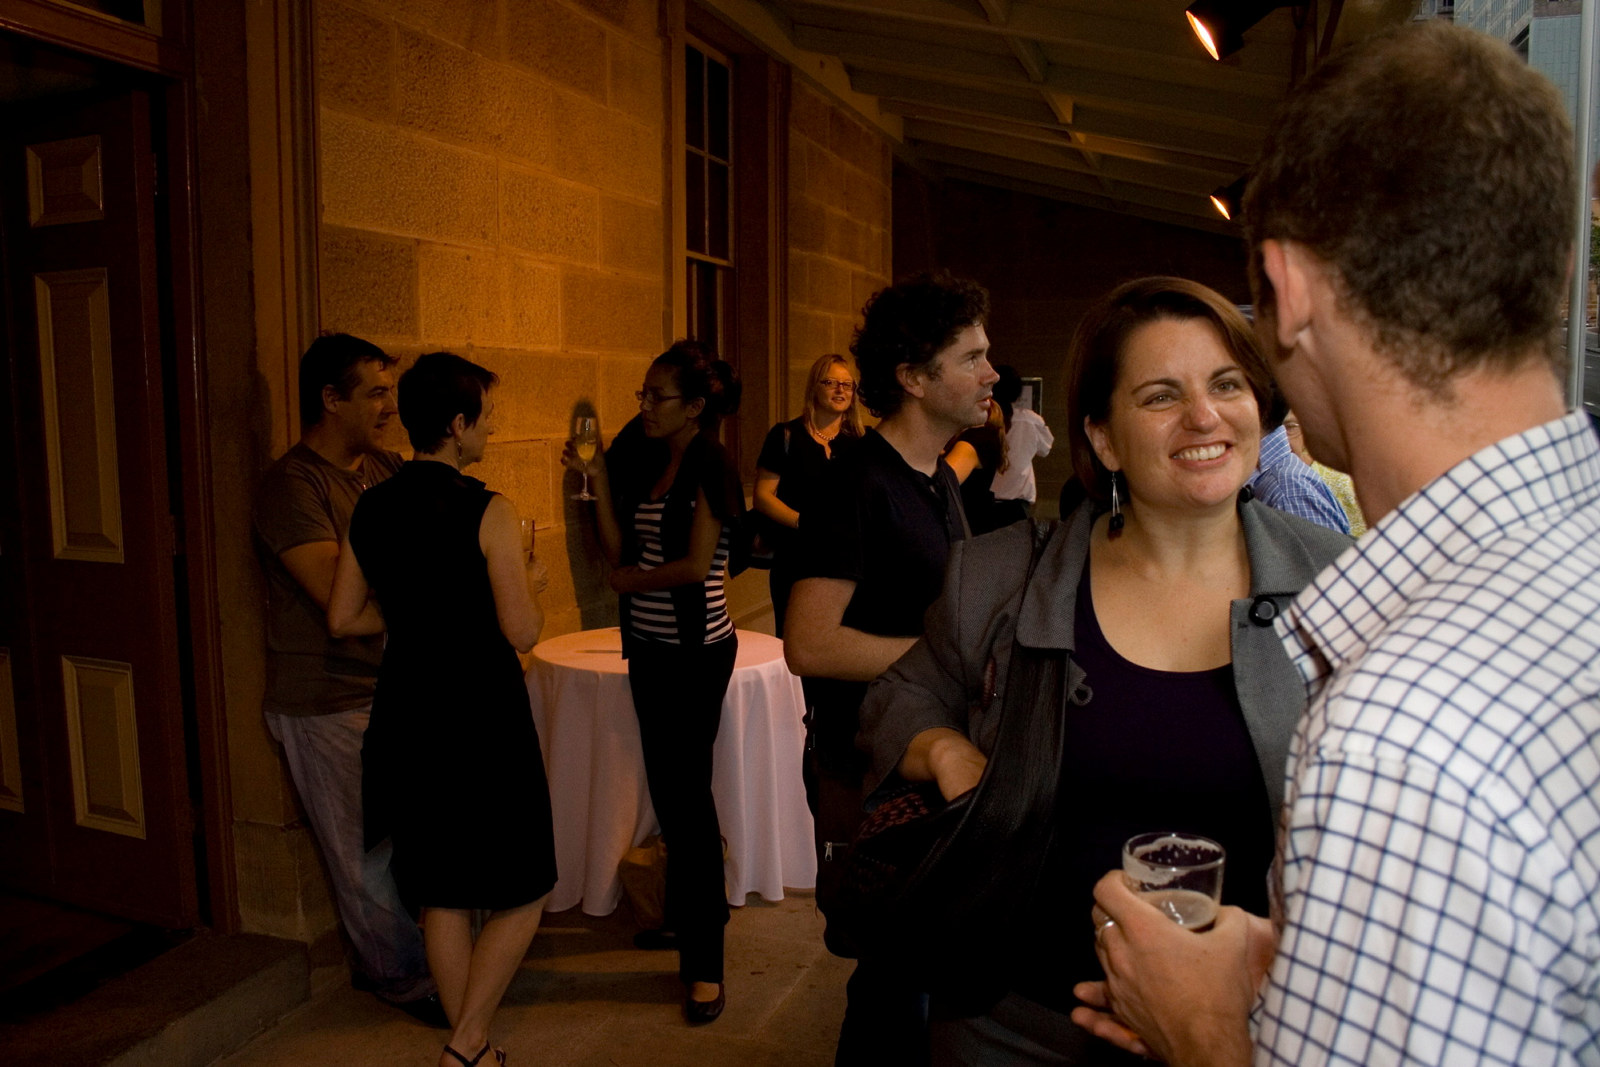 Guests enjoy drinks on the verandah at the launch of SydneyÂ’s Pubs, Justice & Police Museum, 26 February 2008.